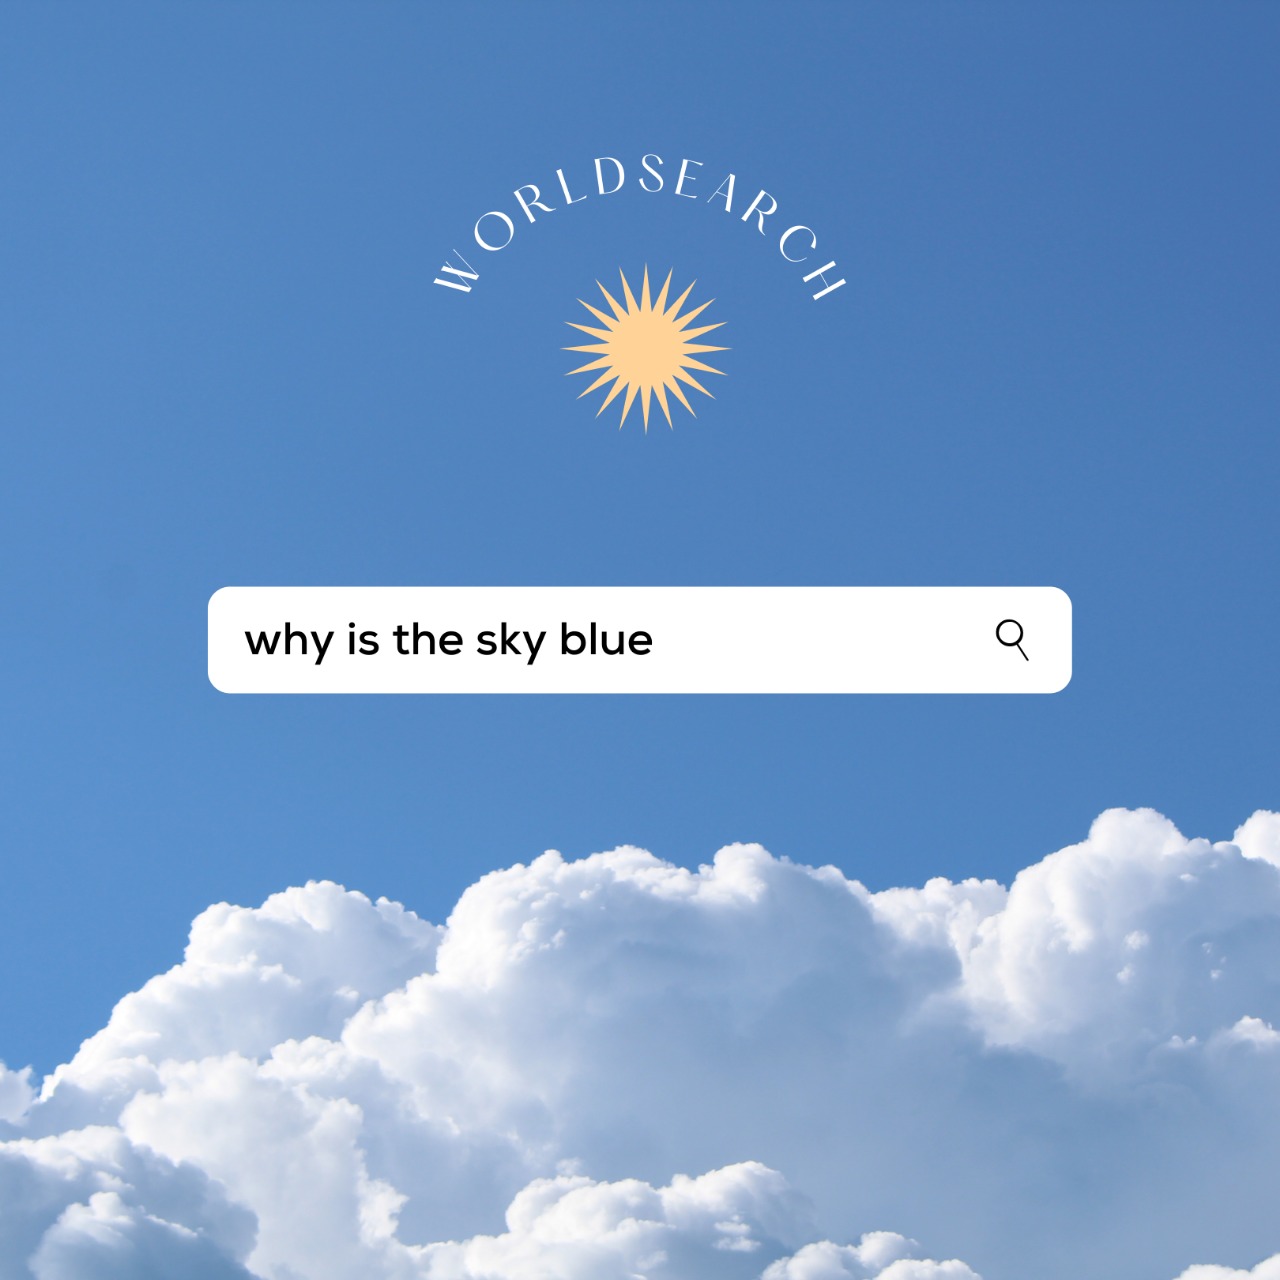 Why is the sky blue